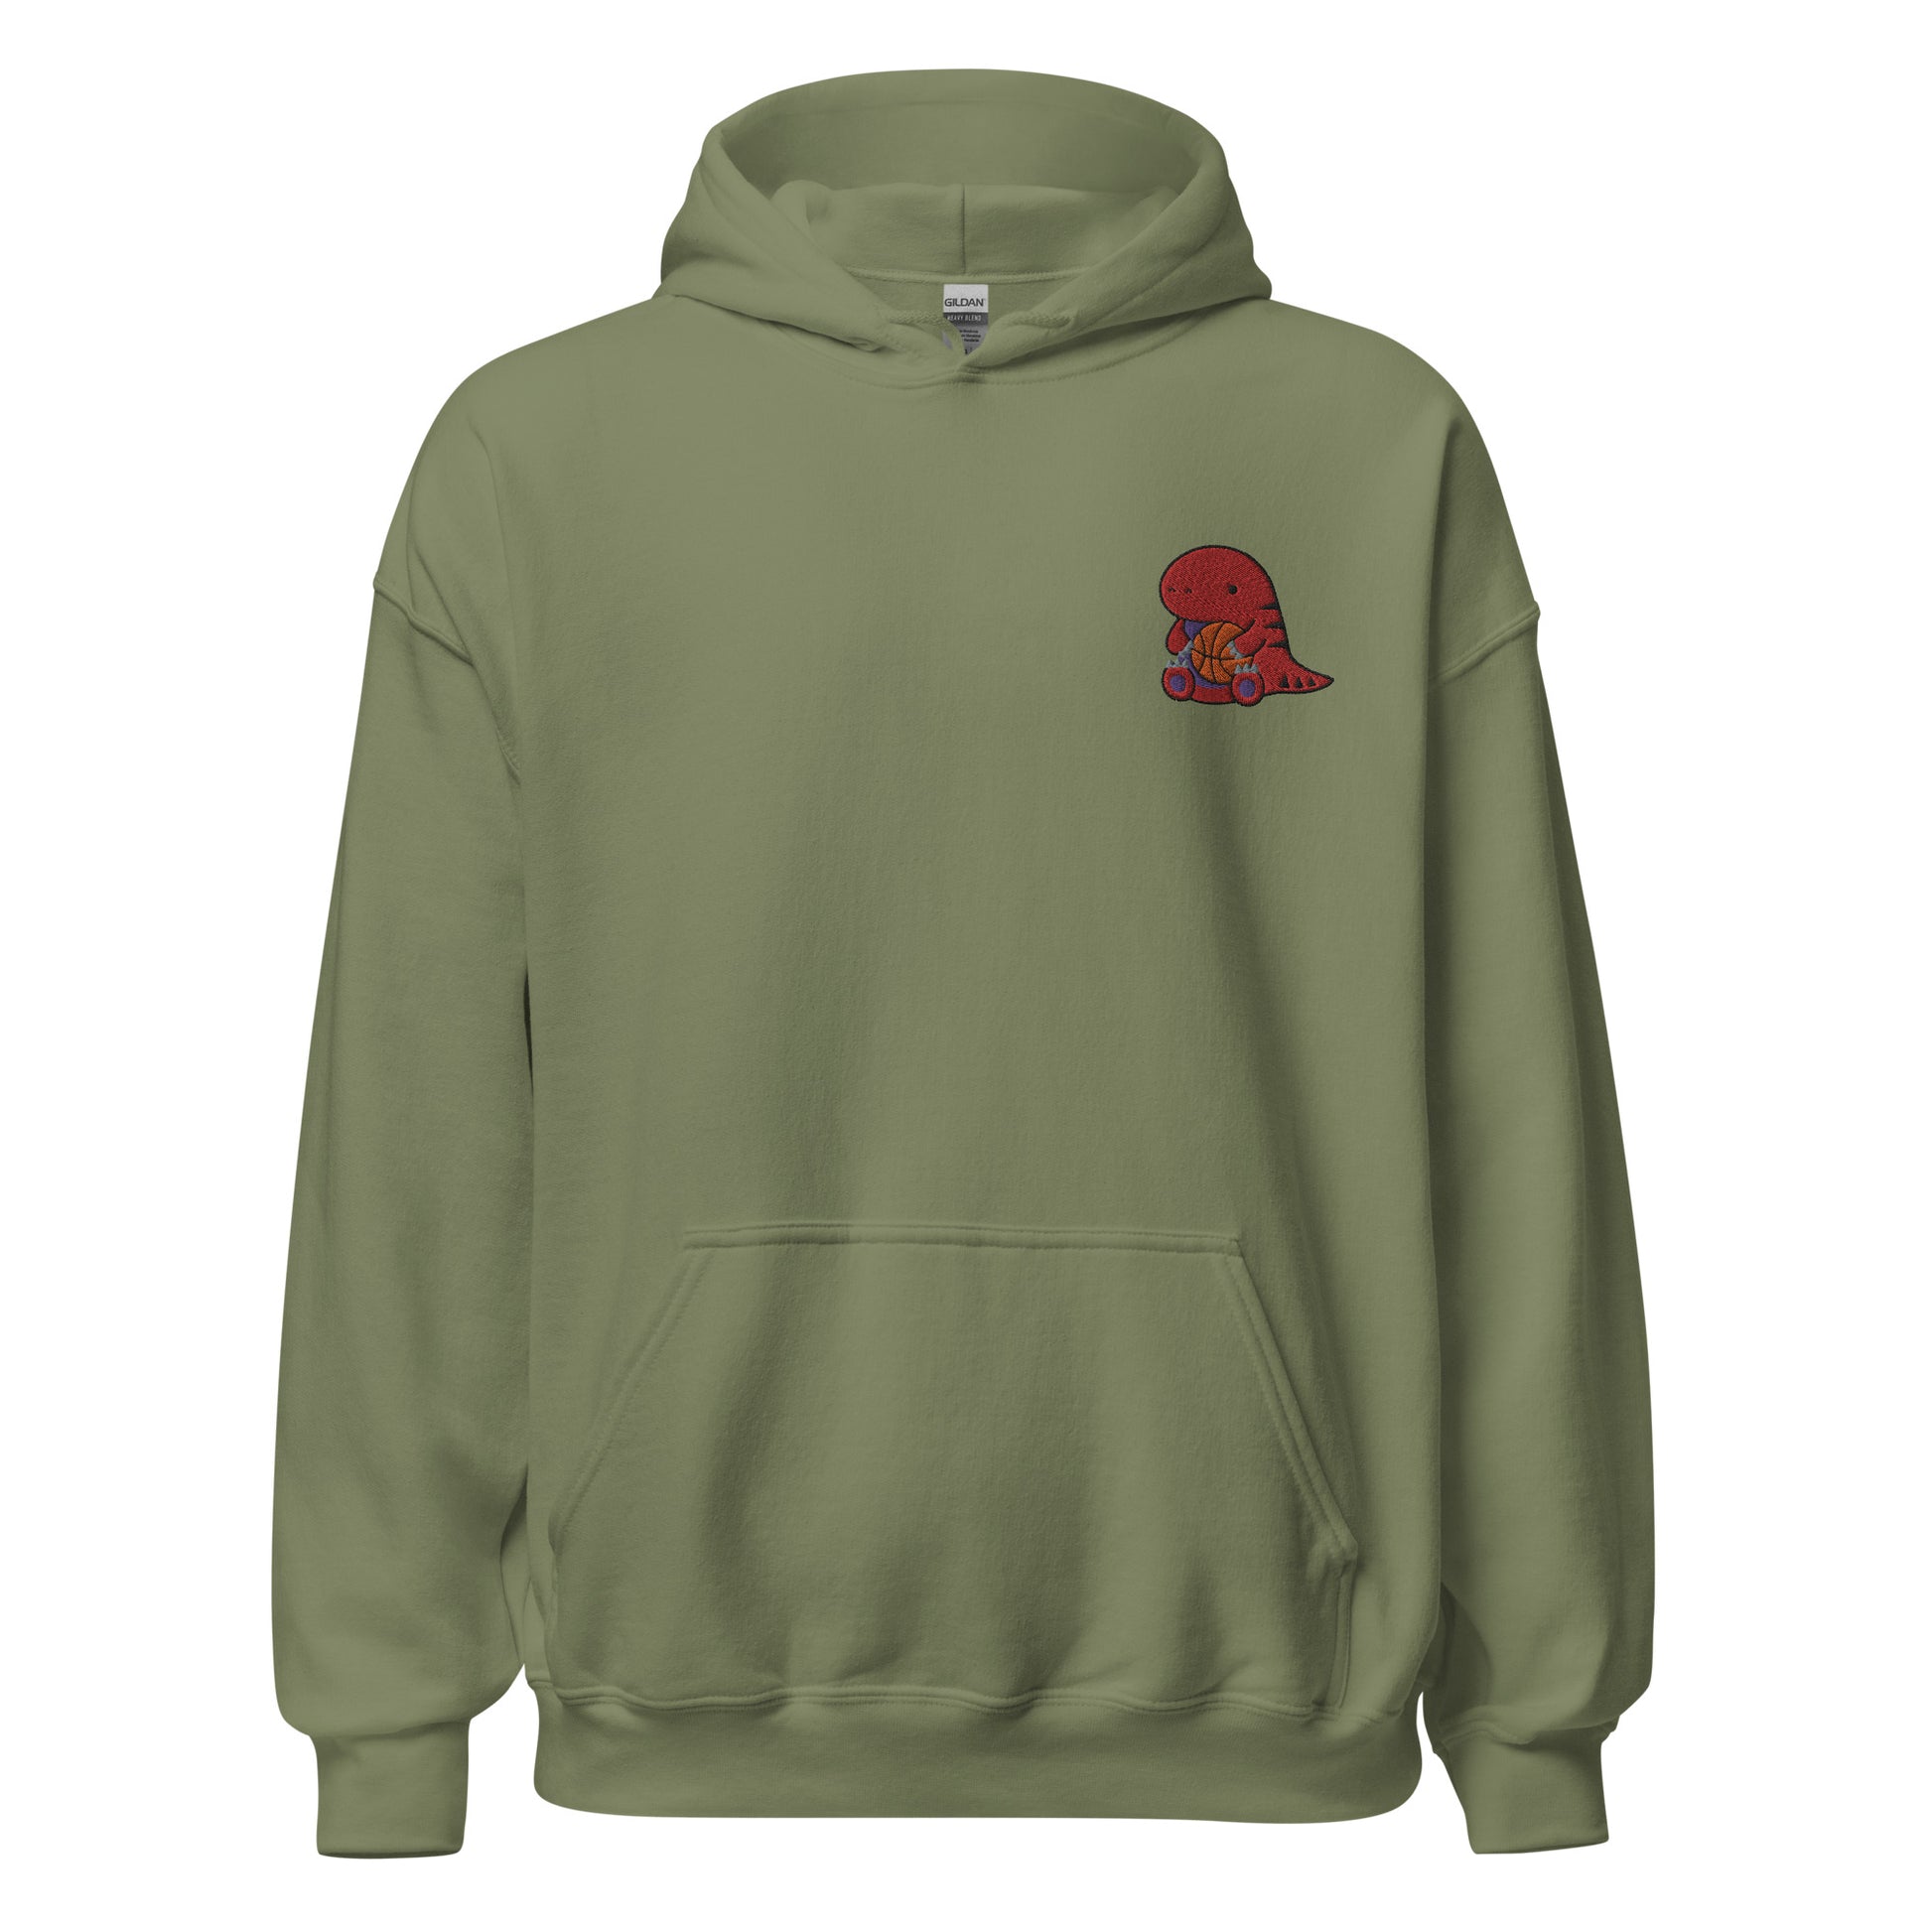 Hoodie with Cute Embroidered Raptor. Toronto Basketball Hoodie: Military Green / S